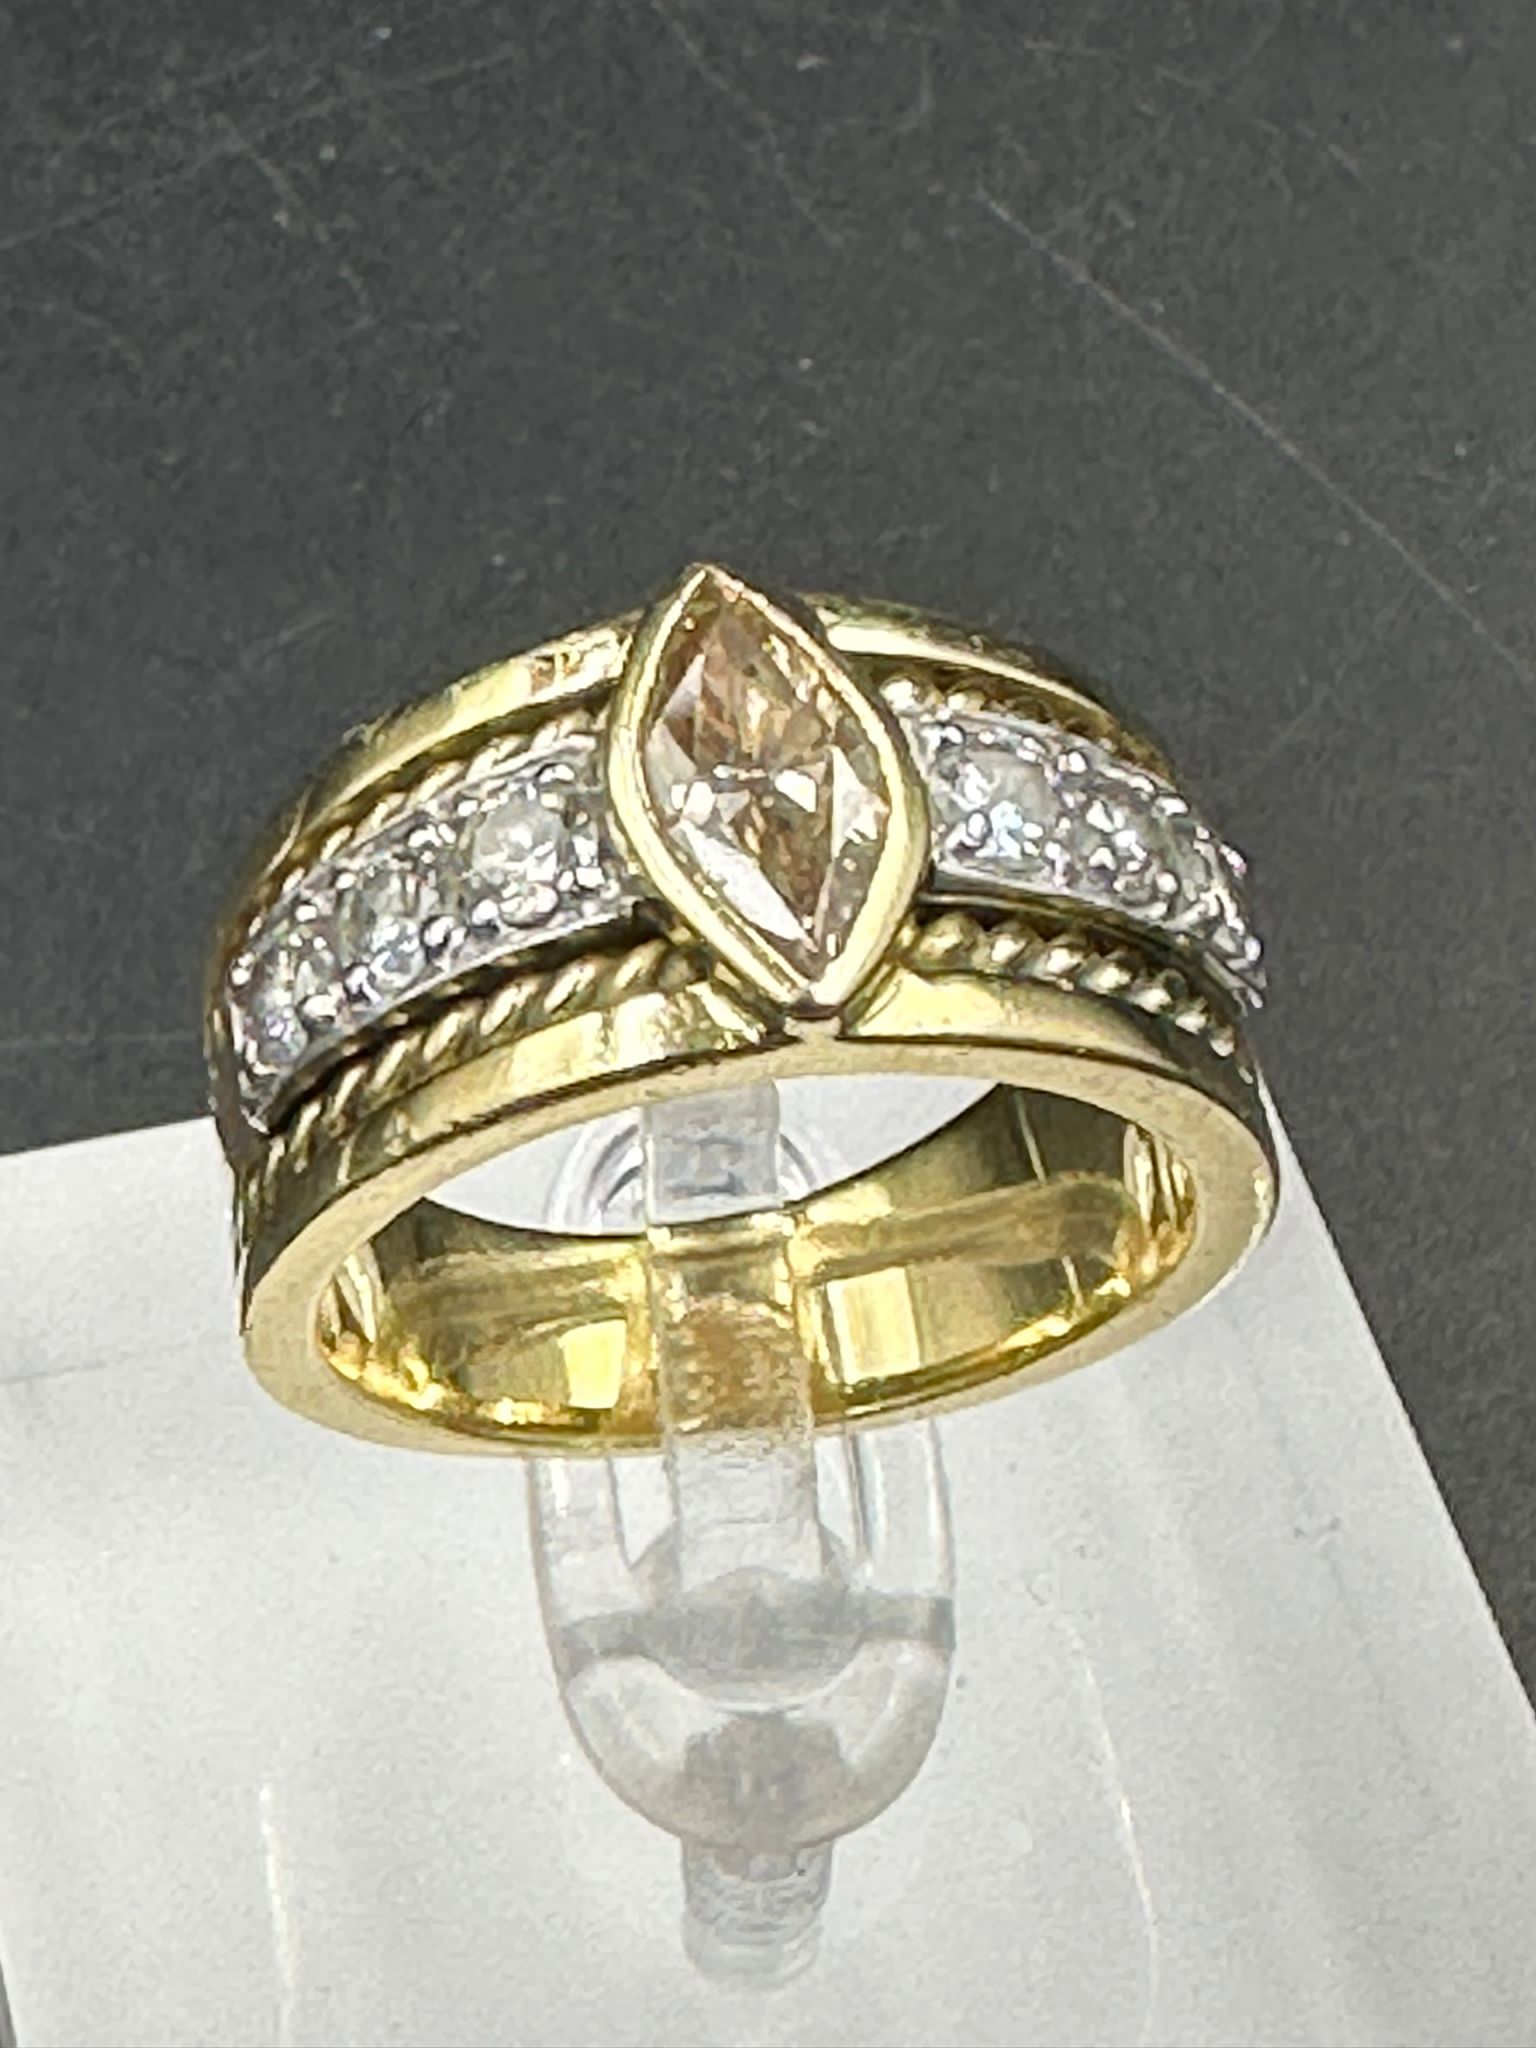 A yellow gold diamond ring with central stone and three separate diamonds to each side .